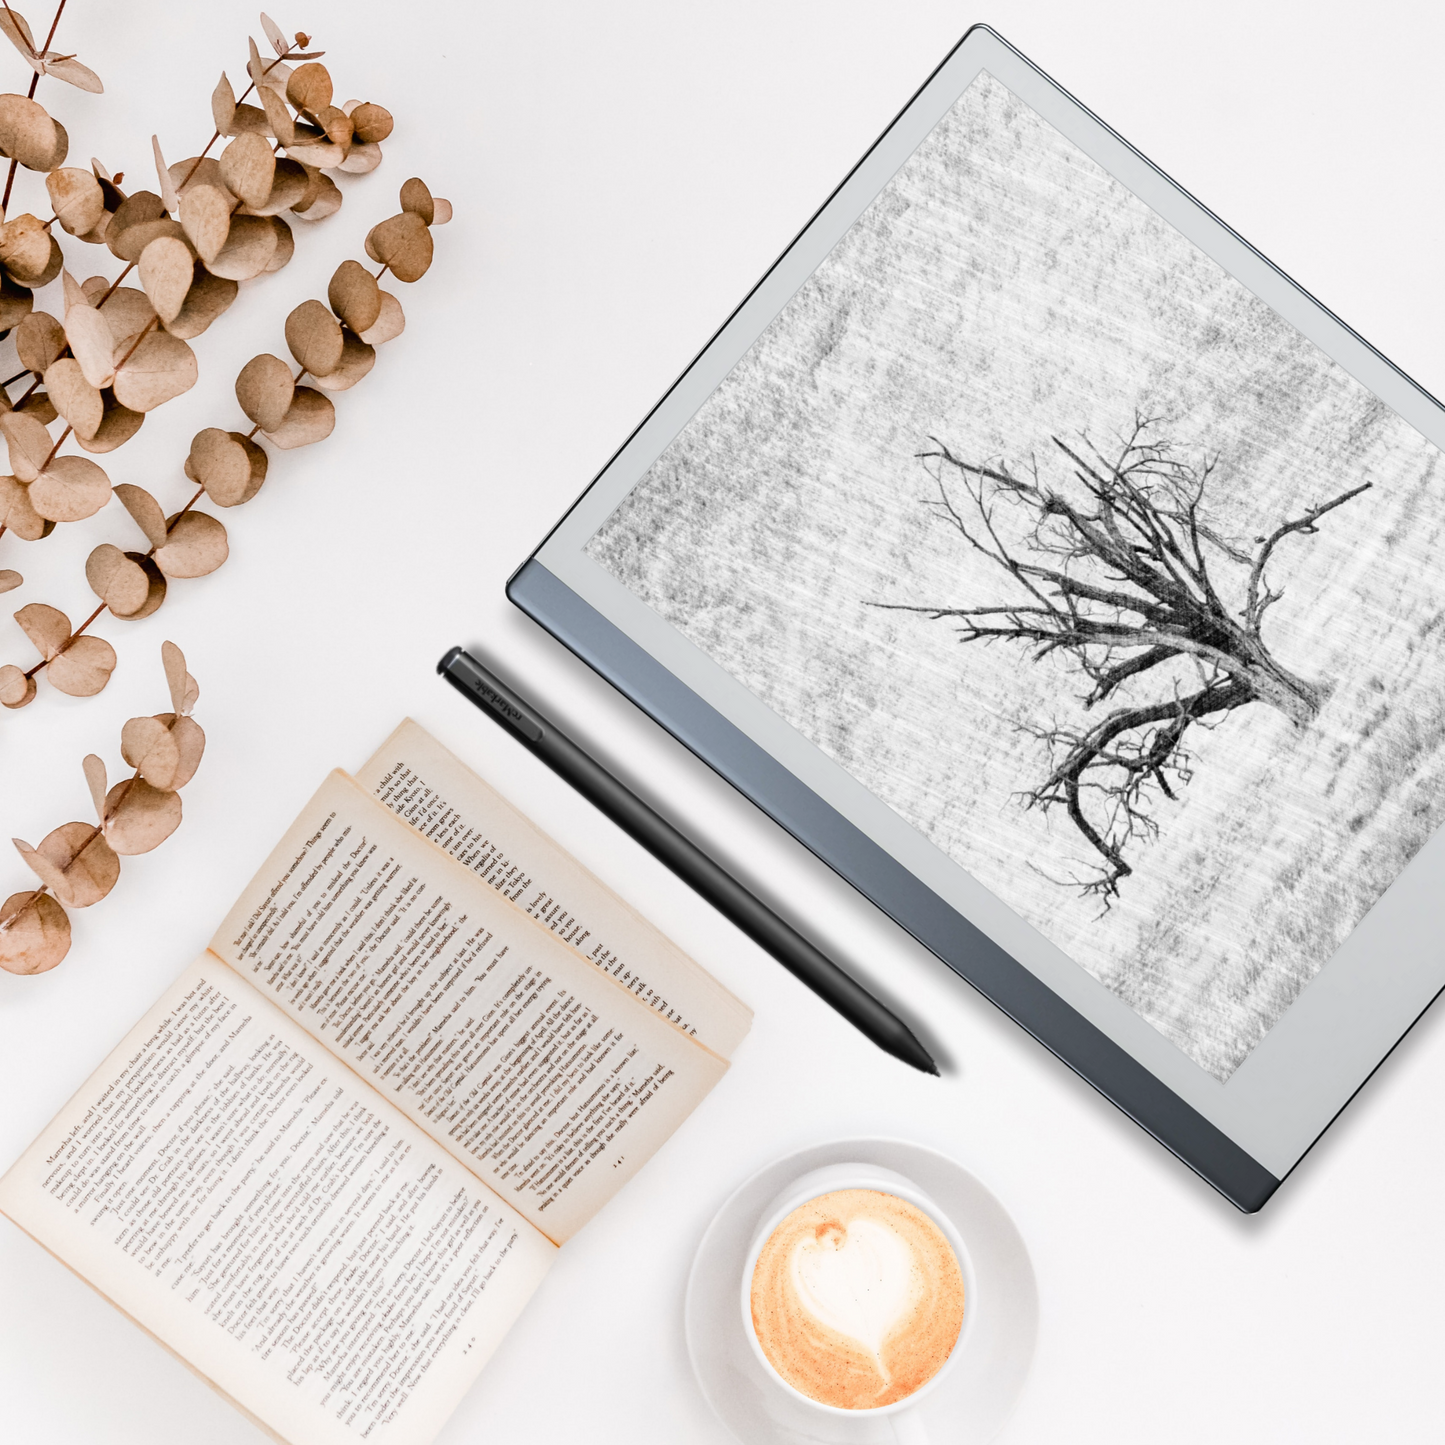 Remarkable 2 Sleep Screen & Notebook Cover Artwork - Imaginative Hand-Drawn Trees Capturing Nature